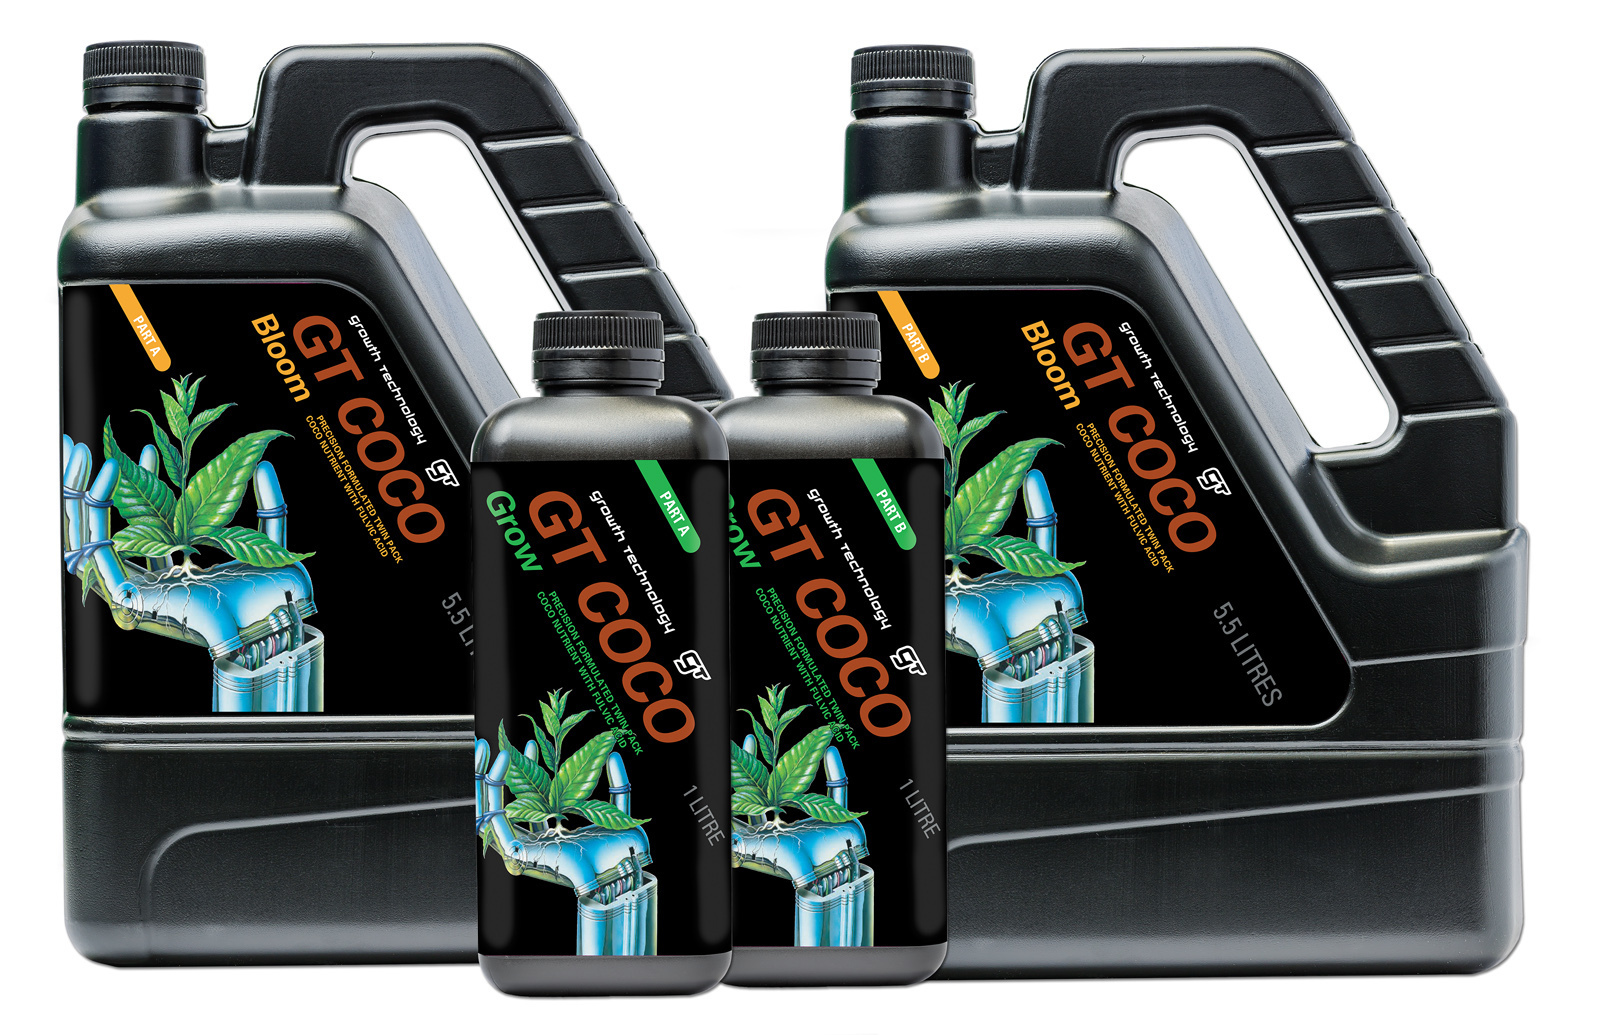 GT Coco Bloom 20+20Ltr = 40L set - Growth technology makers of Optimum Grow